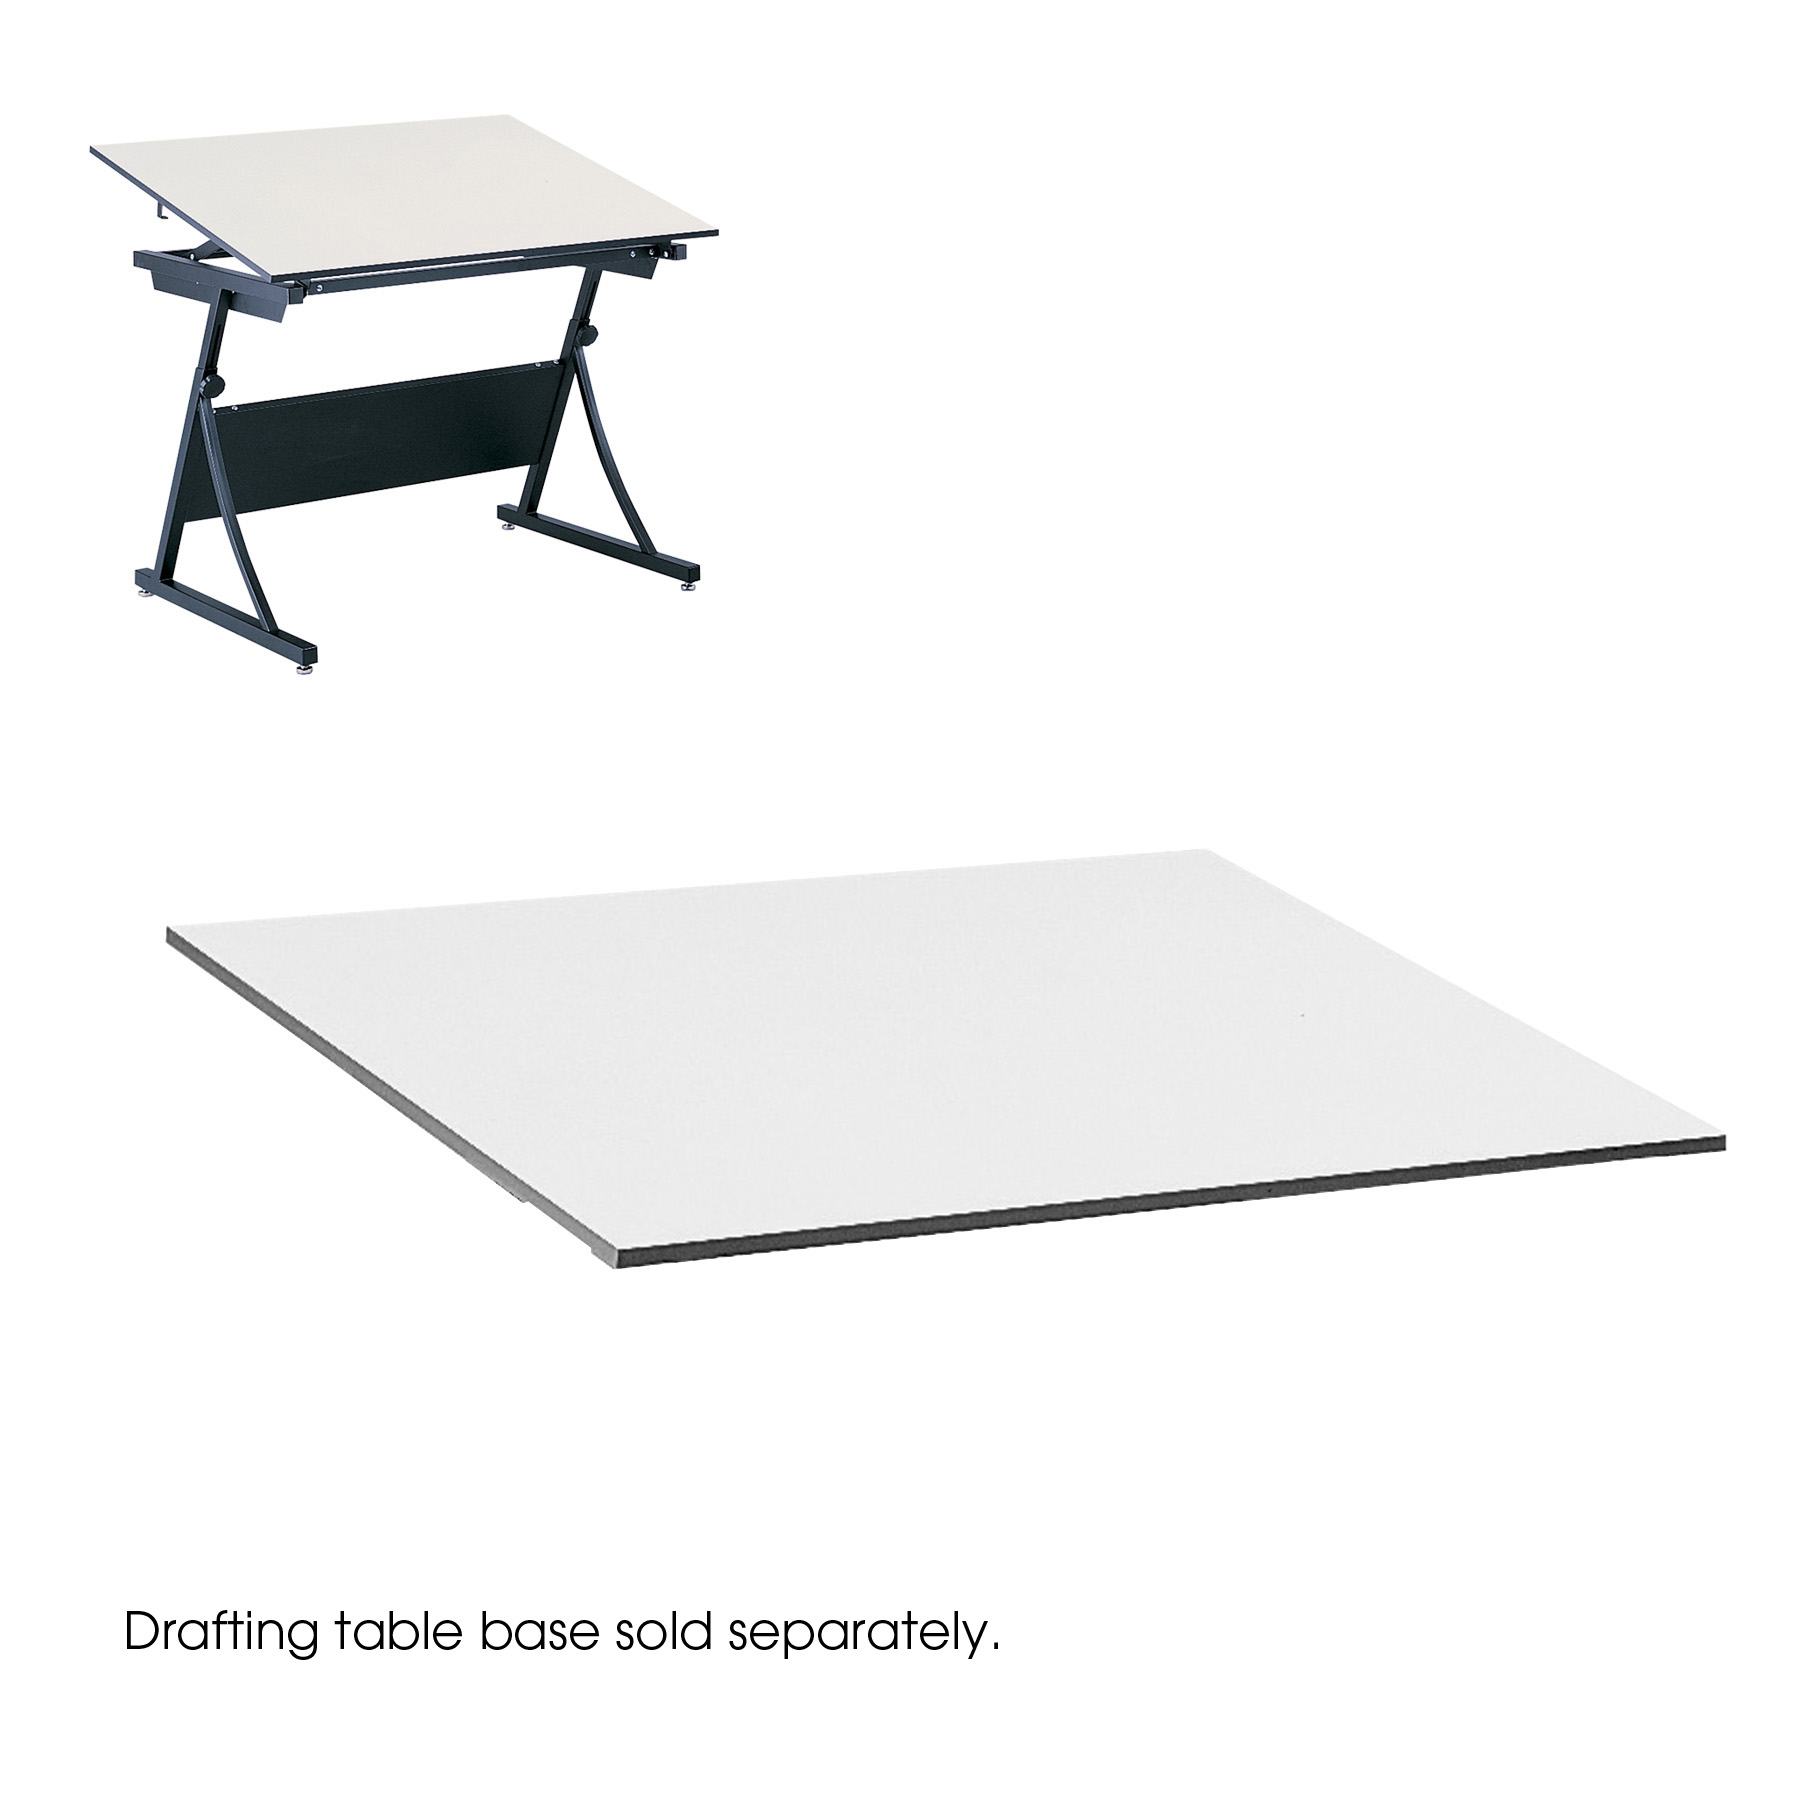 48 x 36 for Table Base 3957 sold separately 3960 or 3961 Safco Products Drafting and Drawing Table Top White 